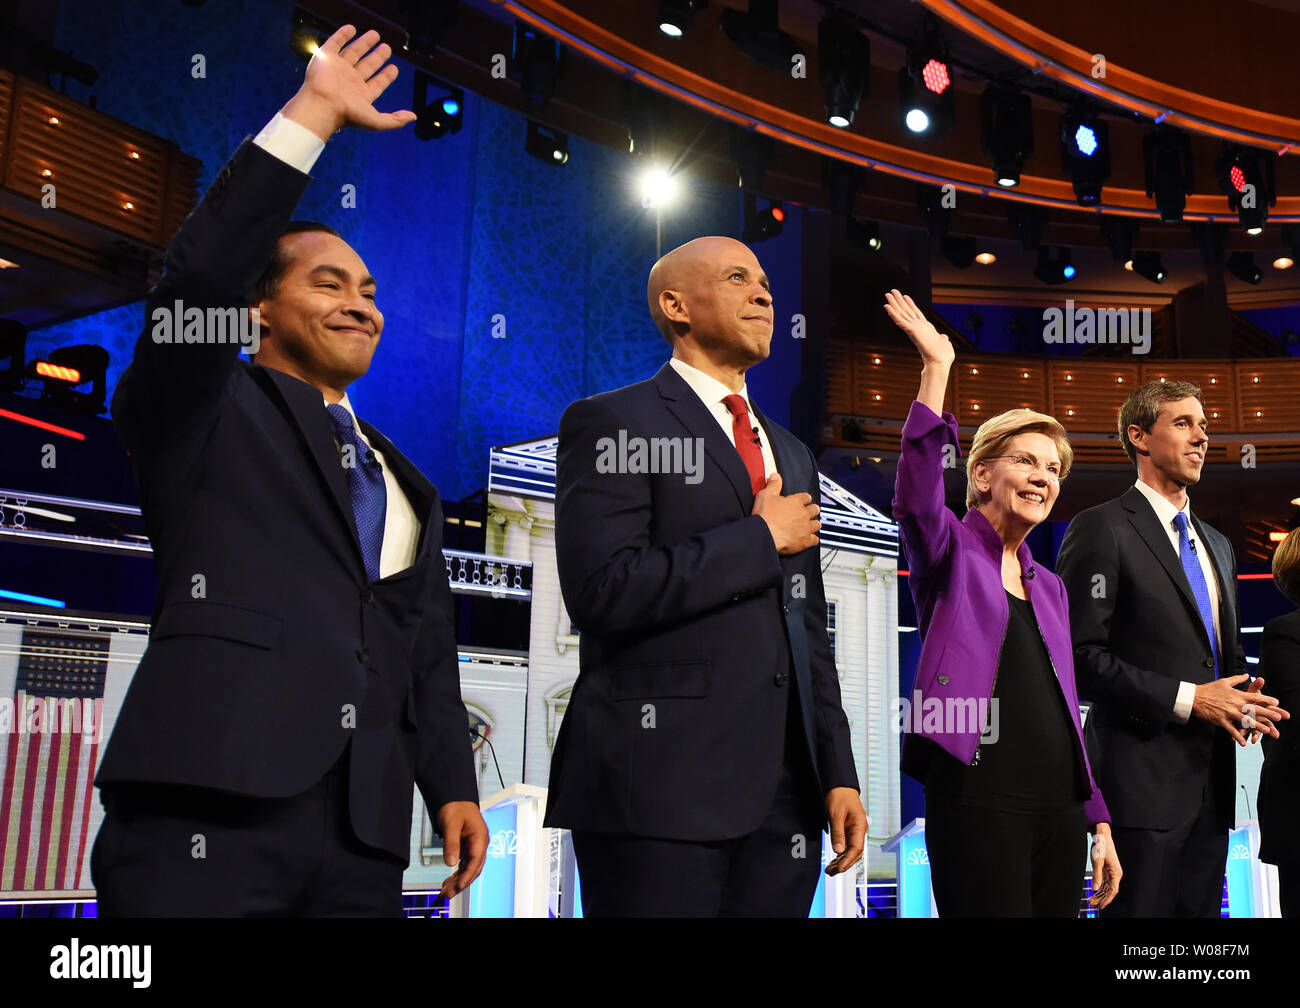 Miami, United States. 26th June, 2019. Democratic presidential candidates (from L) Julian Castro, Cory Booker, Elizabeth Warren, and Beto O'Rourke take the stage at the start of the first Democratic presidential primary debate for the 2020 election on June 26, 2019 at the Knight Concert Hall at the Adrienne Arsht Center for the Performing Arts in Miami, Florida. Credit: Paul Hennessy/Alamy Live News Stock Photo